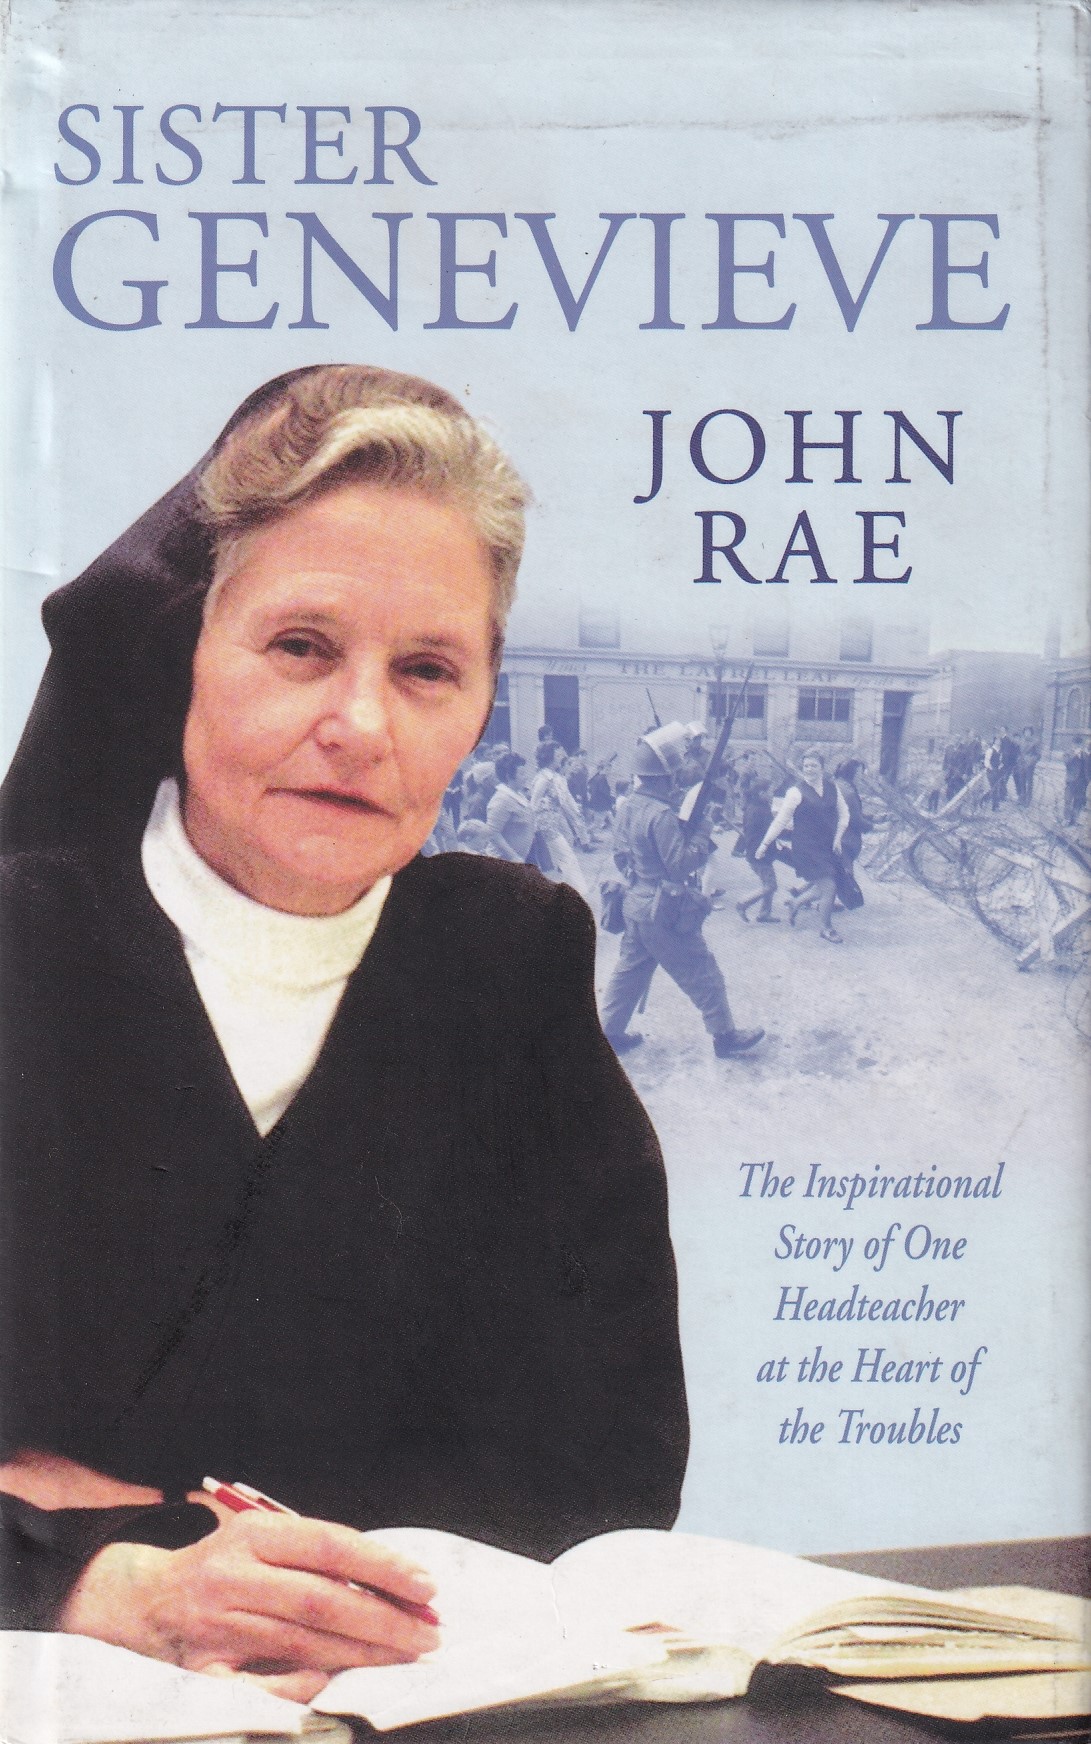 Sister Genevieve: The Inspirational Story of One Headteacher at the Heart of the Troubles by John Rae